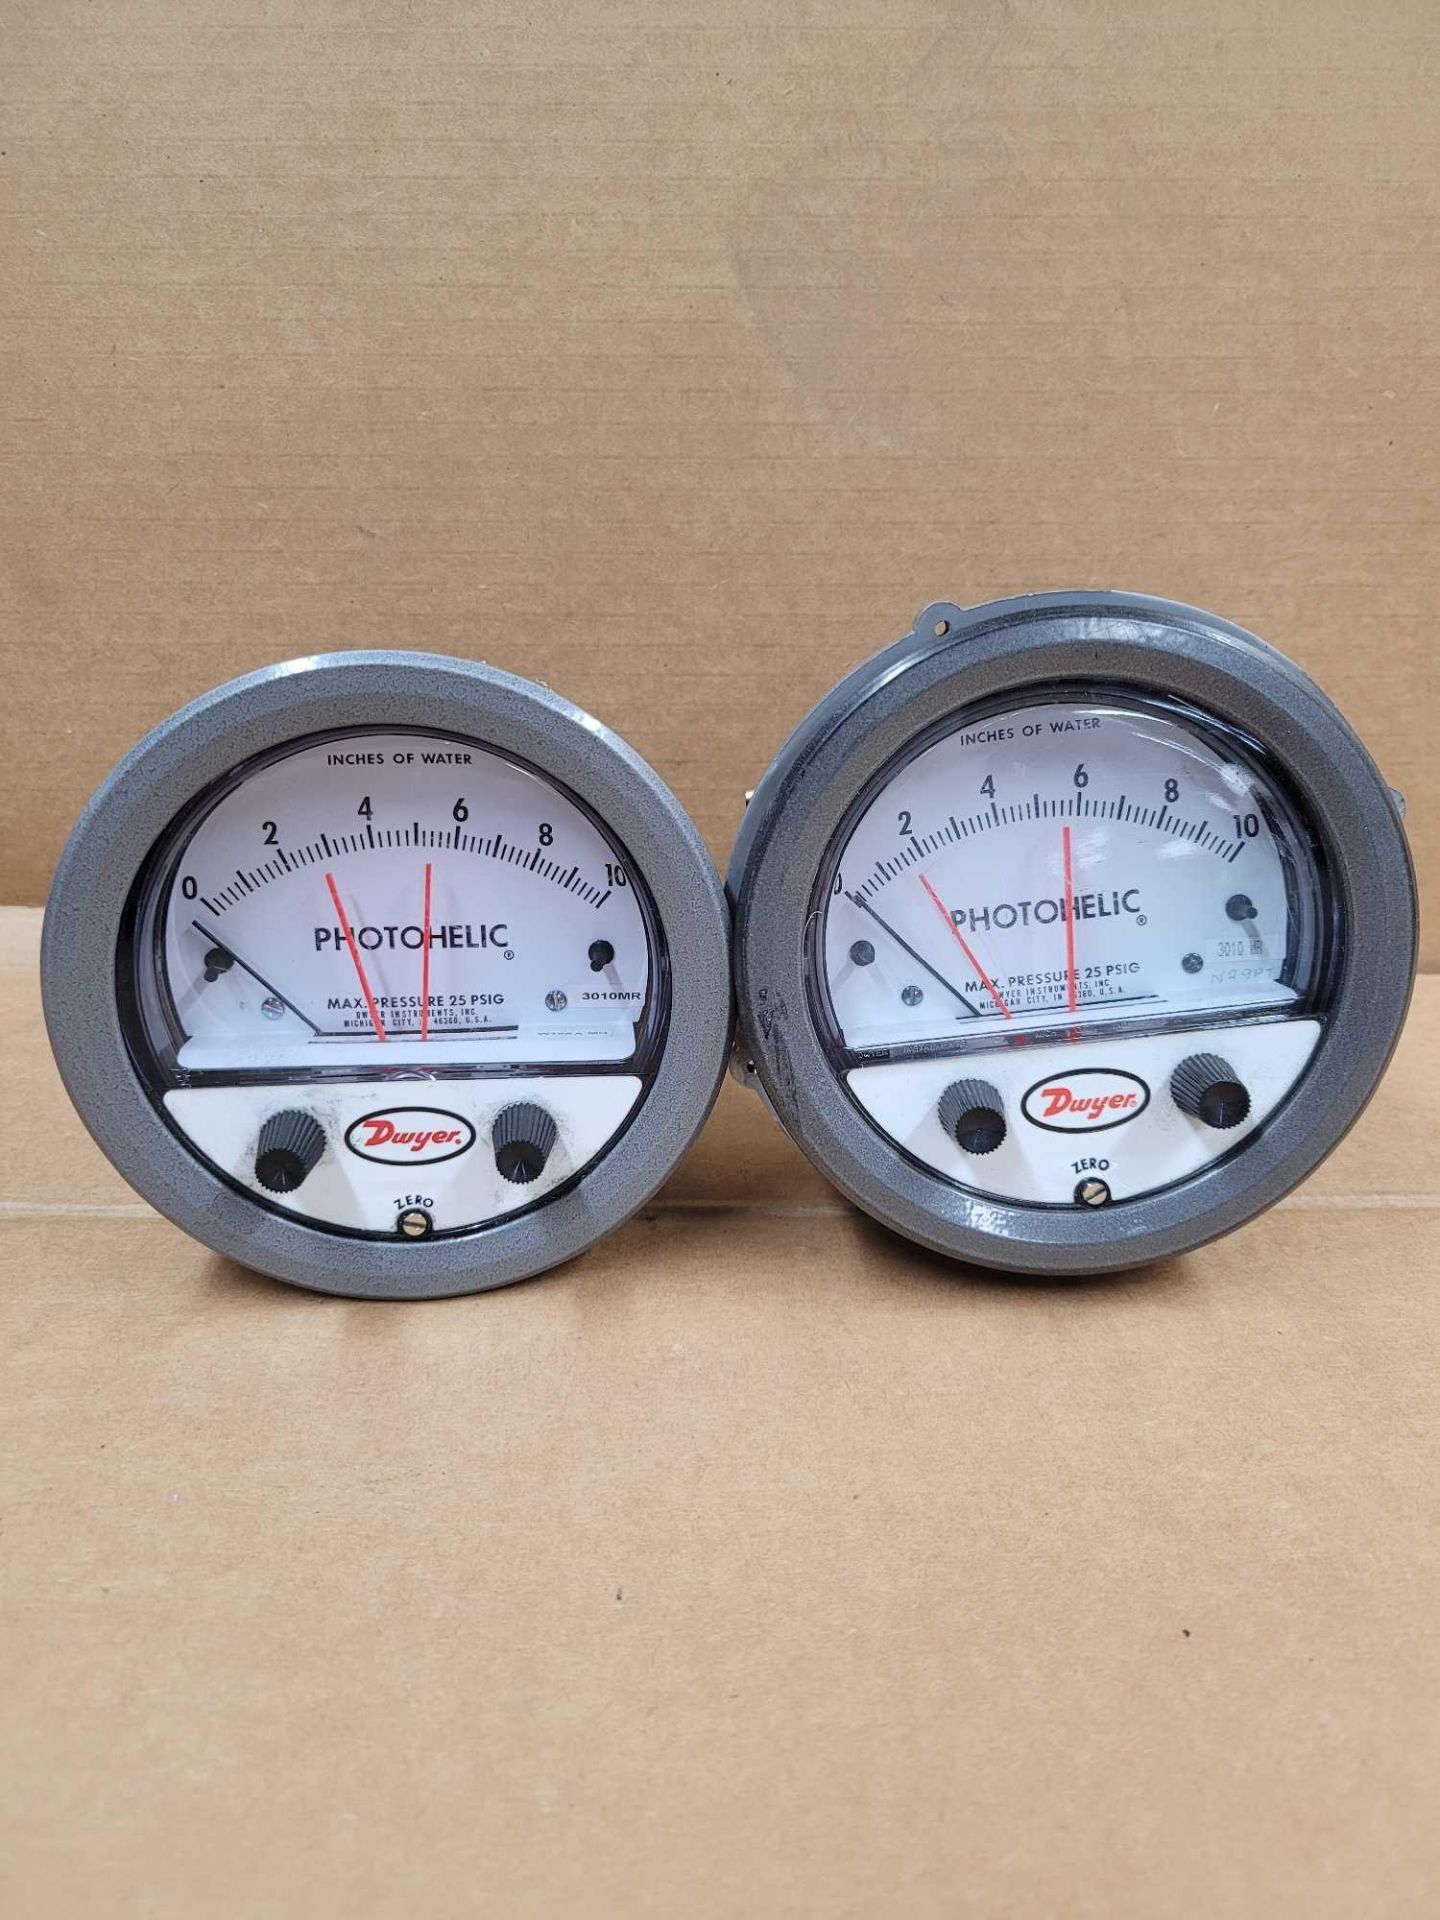 LOT OF 2 DWYER 3010MR / Series 3000MR 0-10" Photohelic Gauge  /  Lot Weight: 3.6 lbs